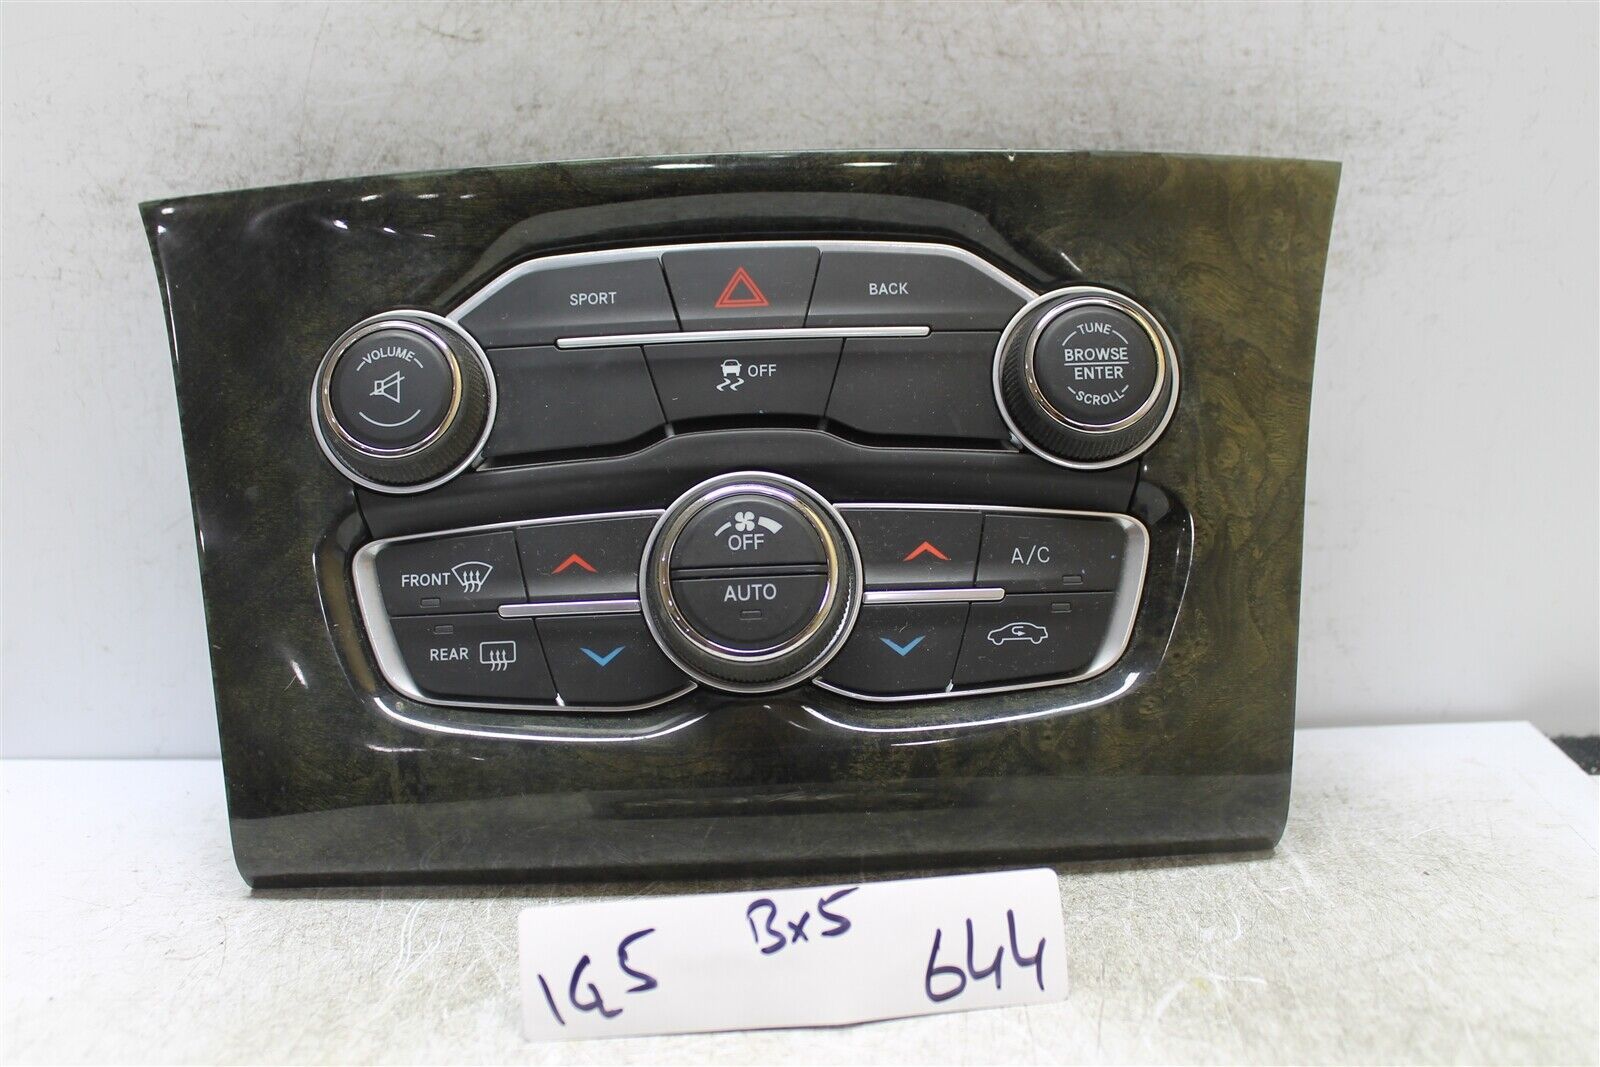 Primary image for 2015-2016 Chrysler 300 AC Heat Temp Climate Control 56054903AC OEM 644 1G5-B5